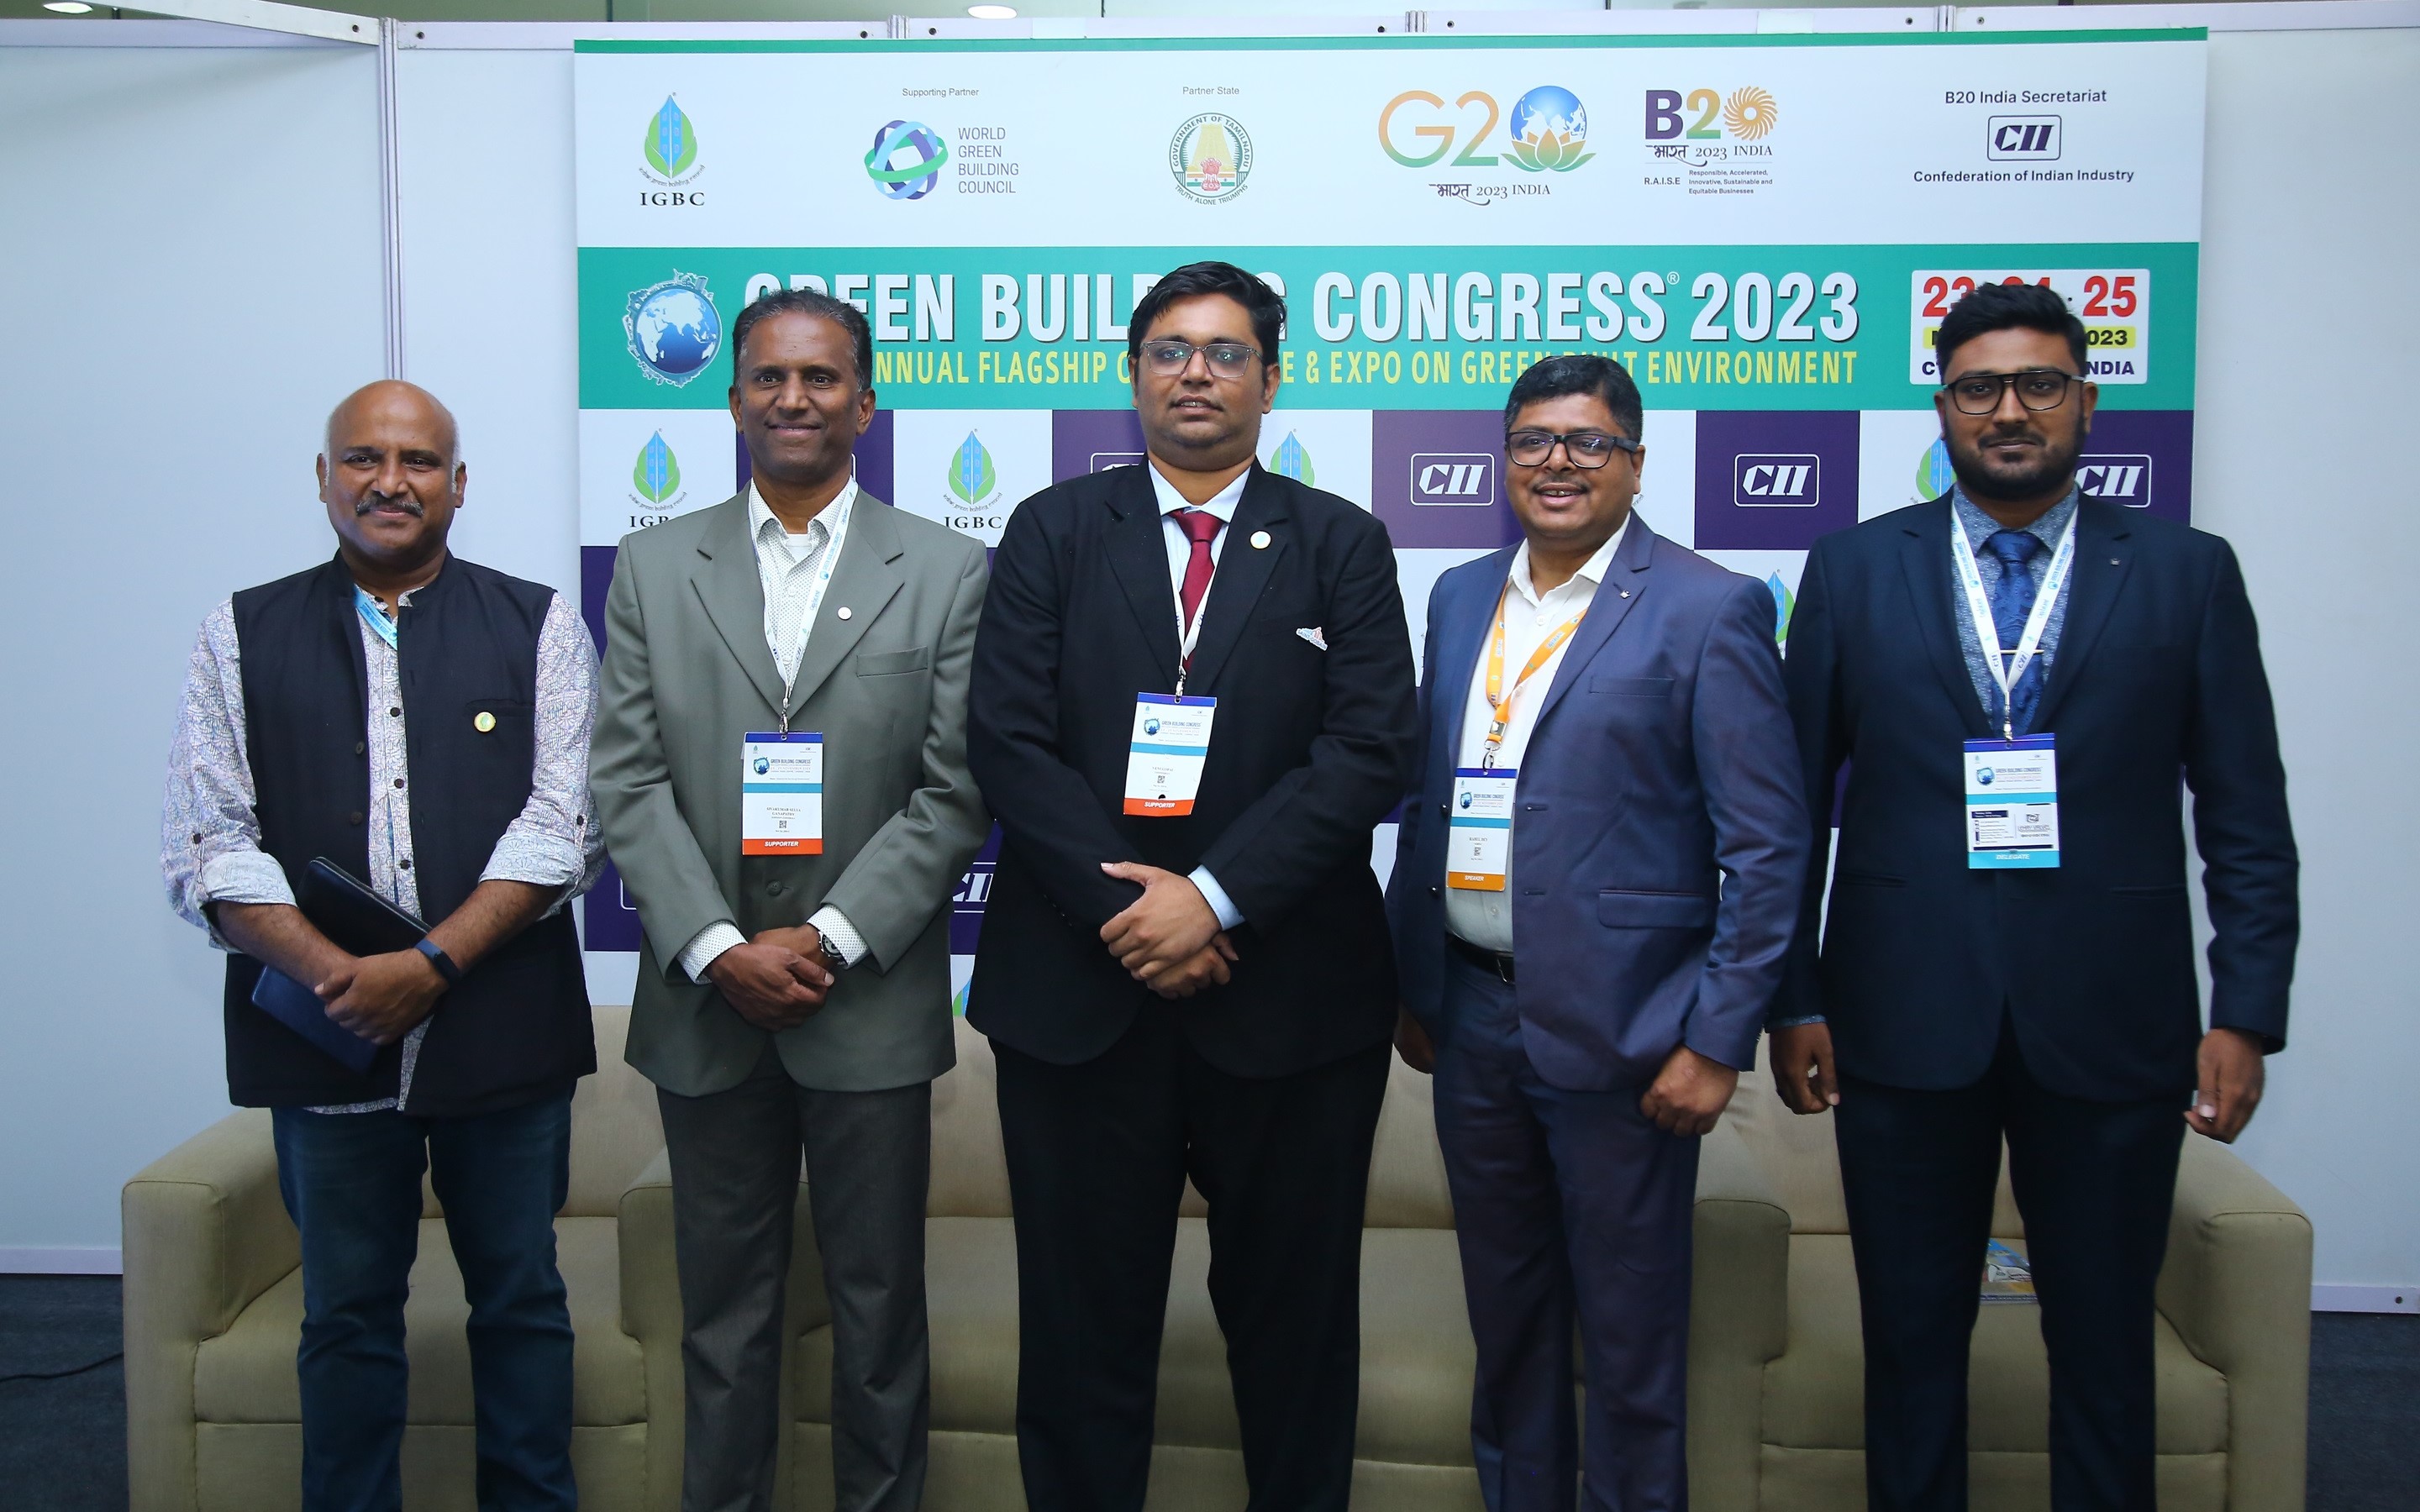 Leading Industry Giants Unveil Cutting-Edge Green Products at IGBC’s Green Building Congress 2023